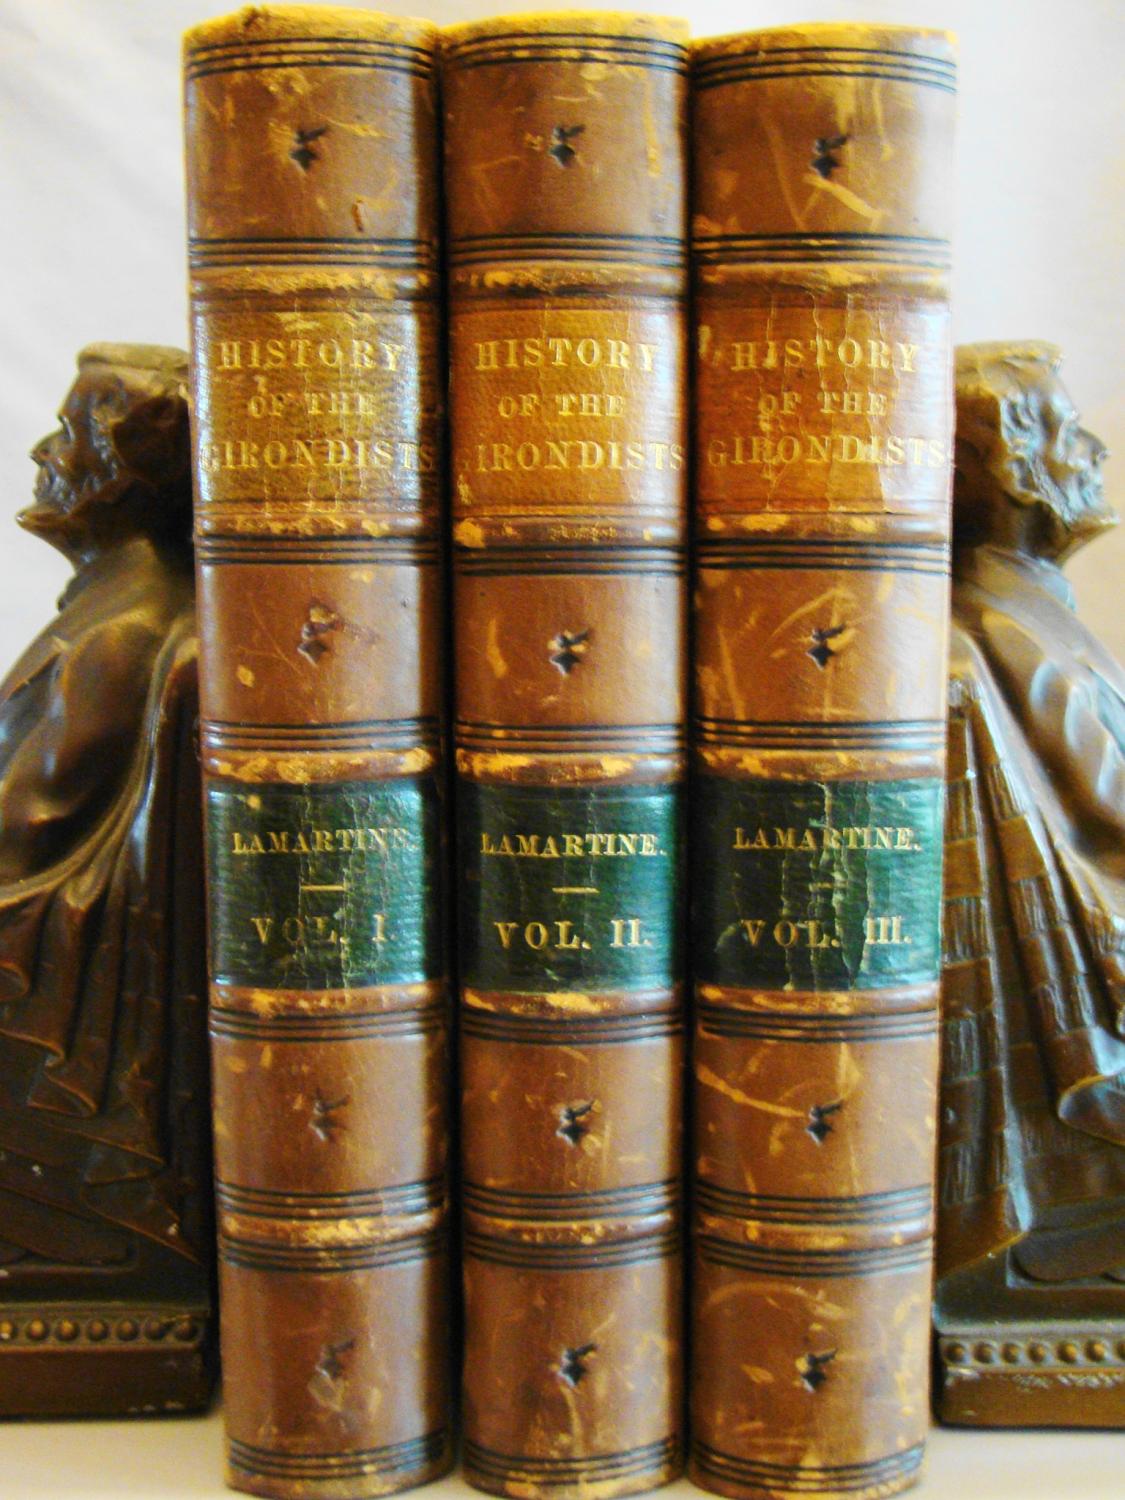 History of the Girondists; Or, Personal Memoirs of the Patriots of the French Revolution. 3 vols in half calf & marbled boards. - De Lamartine, Alphonse. Translated by H. P. Ryde.